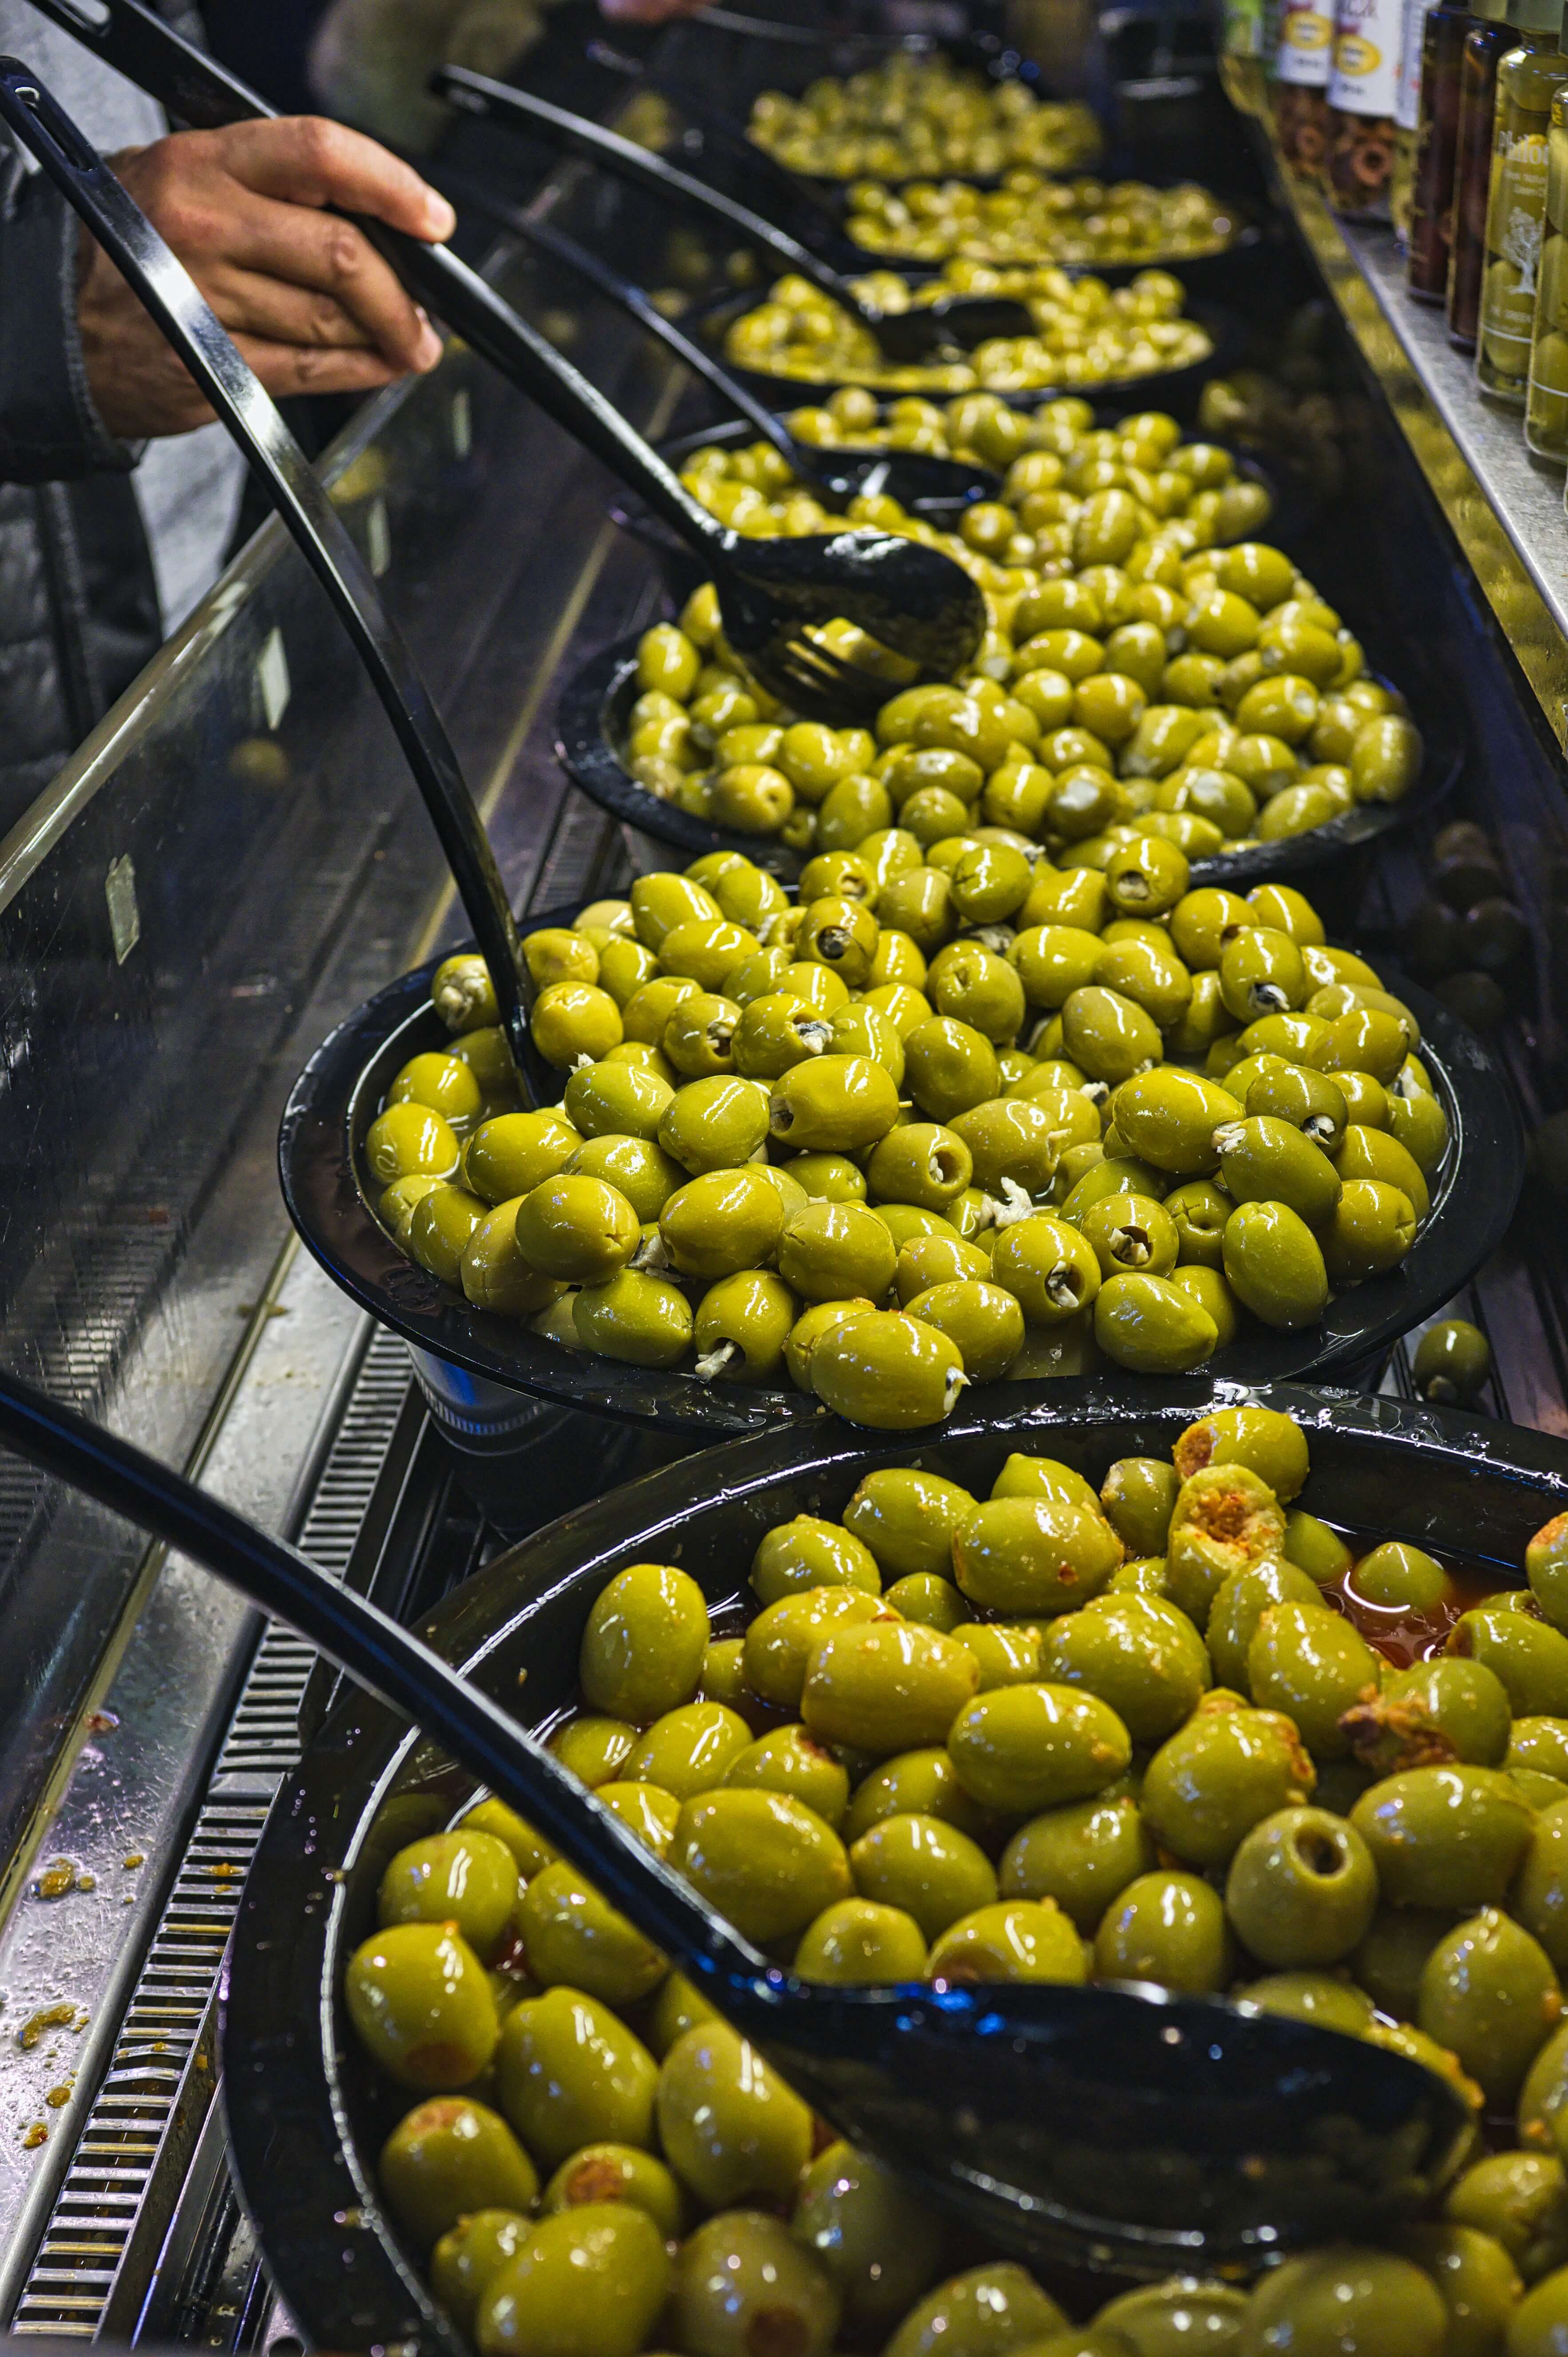 Is It Possible For Olives To Get Spoiled?